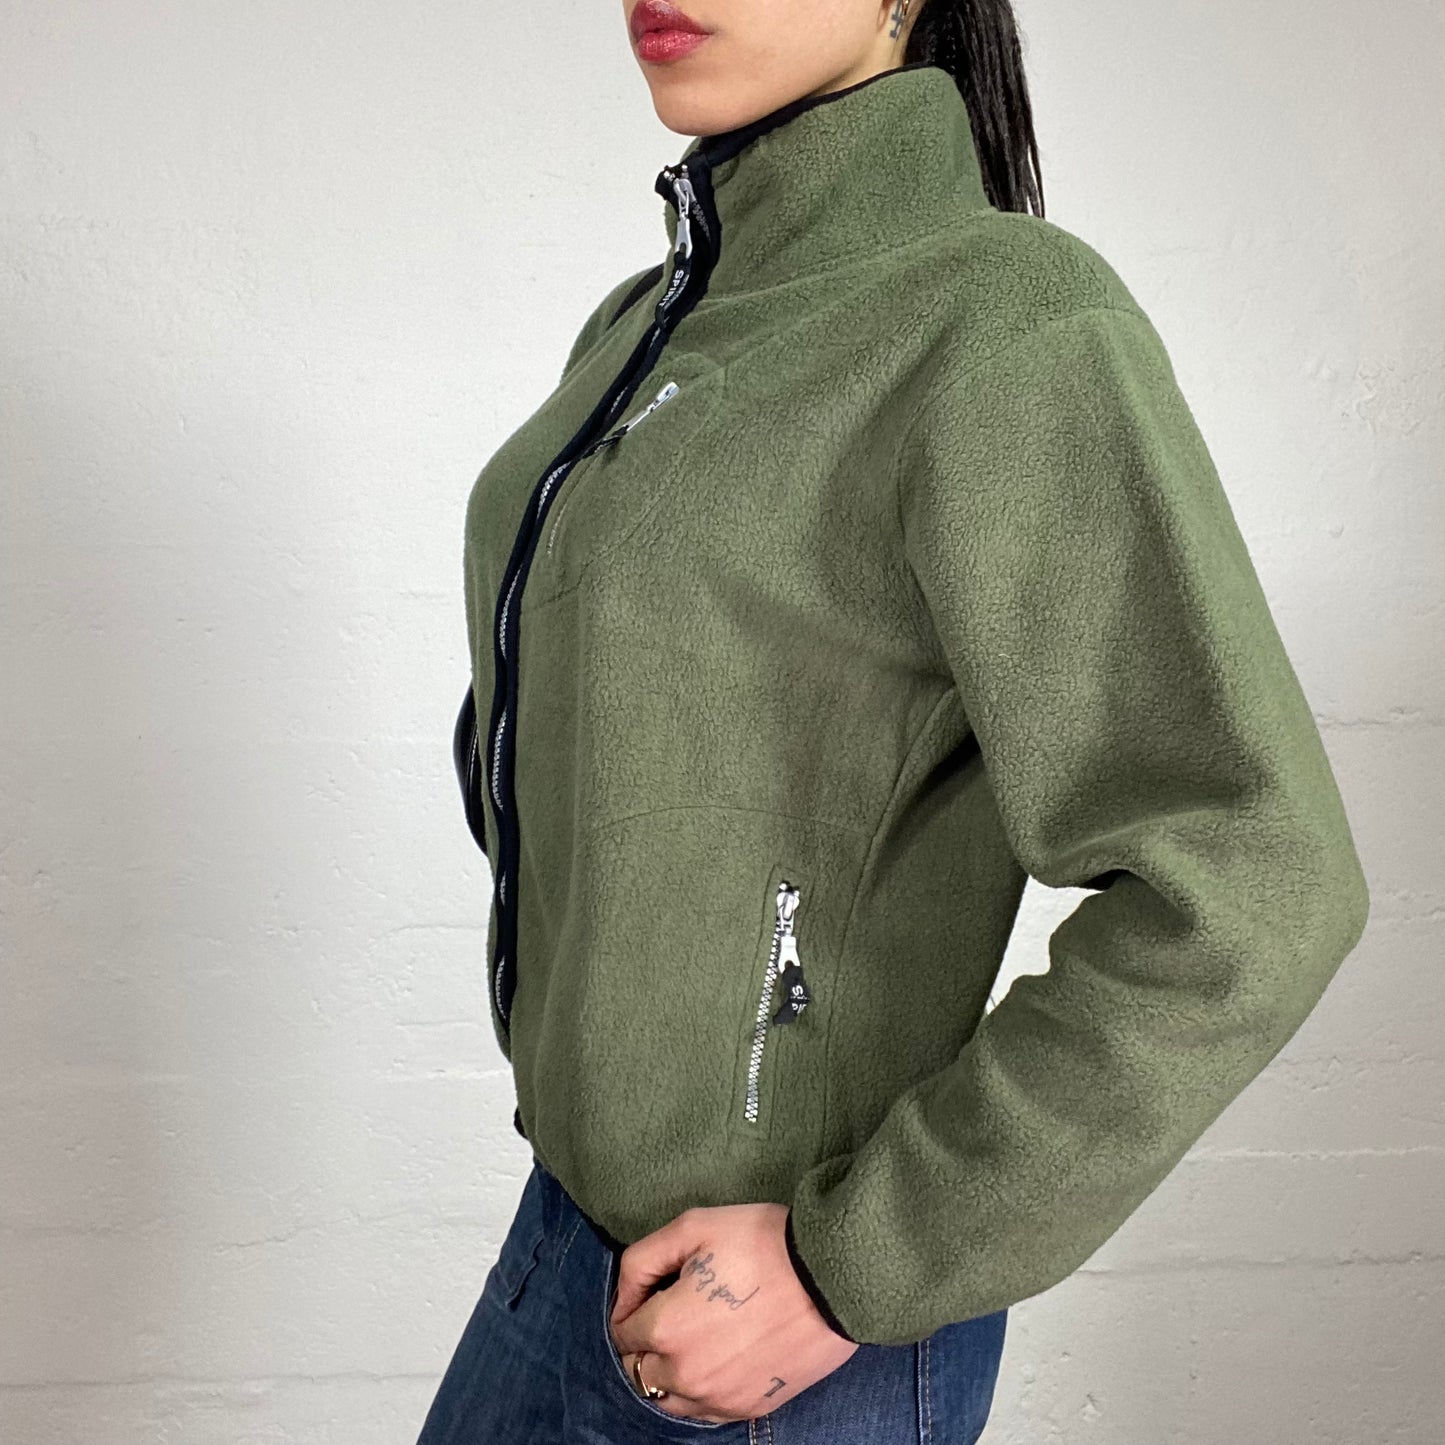 Vintage 90’s Skater Girl Feezy Khaki Green Zip Up Pullover Style Jacket with Back Cartoon Embroidery Detail (L)